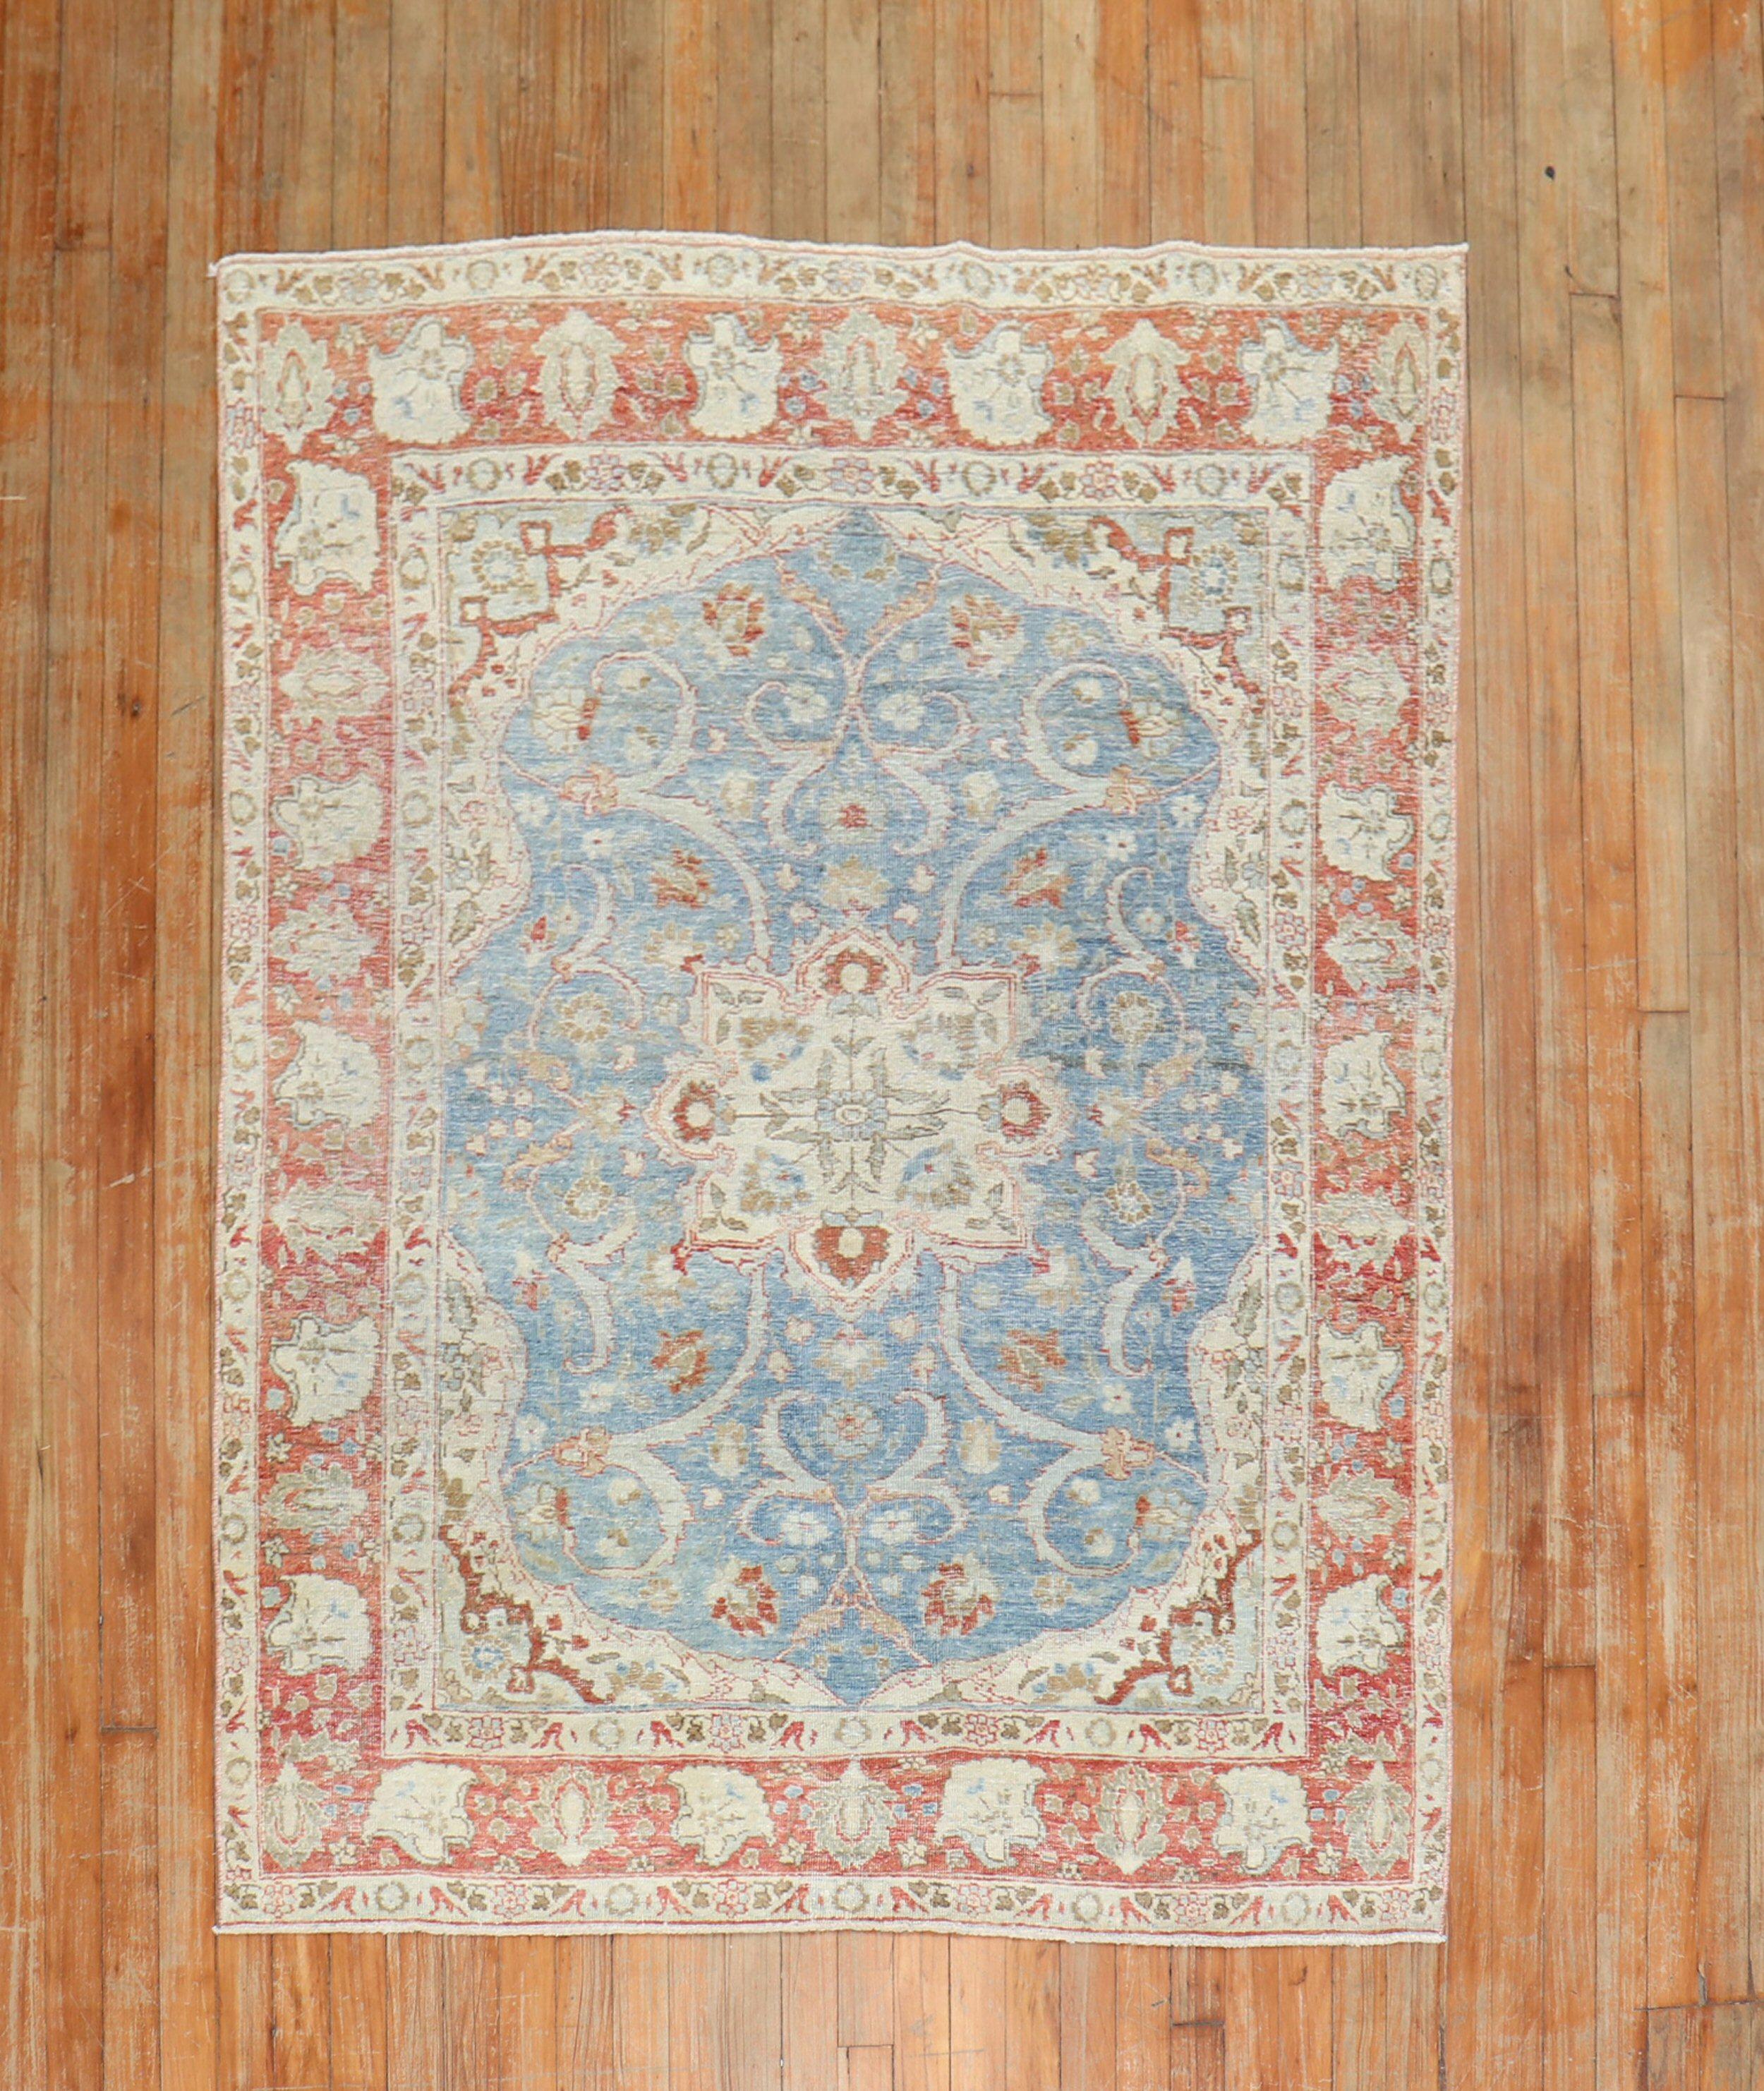 1930s Persian Tabriz Rug in soft blues and soft red

Measures: 4'6'' x 6'2''.

